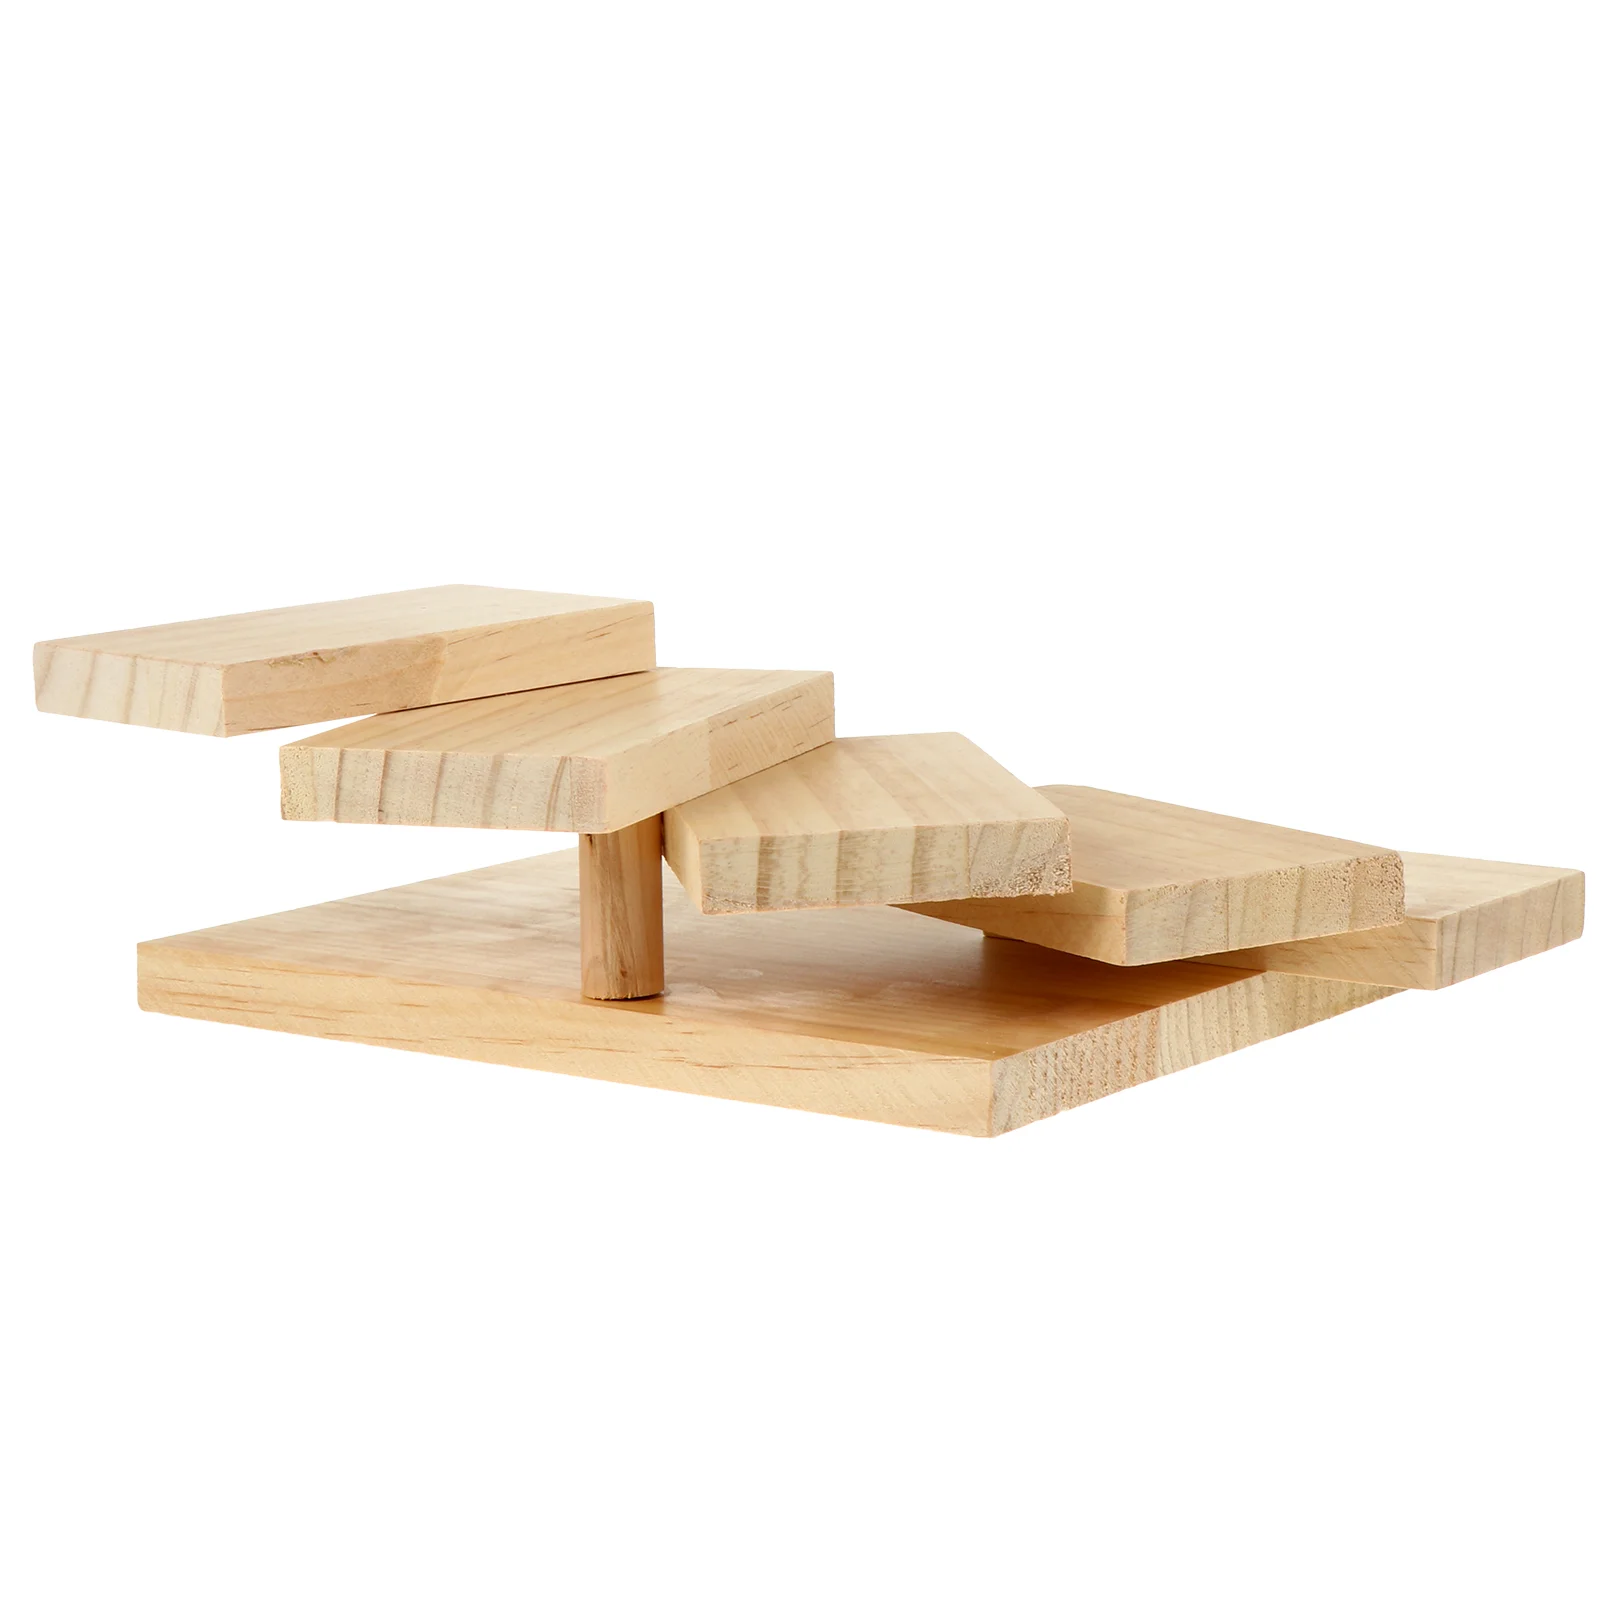 

Wooden Board Sashimi Display Stand Sushi Plate Serving Tray Charcuterie Wood Cheese Japanese Set For Dish Platter Dessert Boards